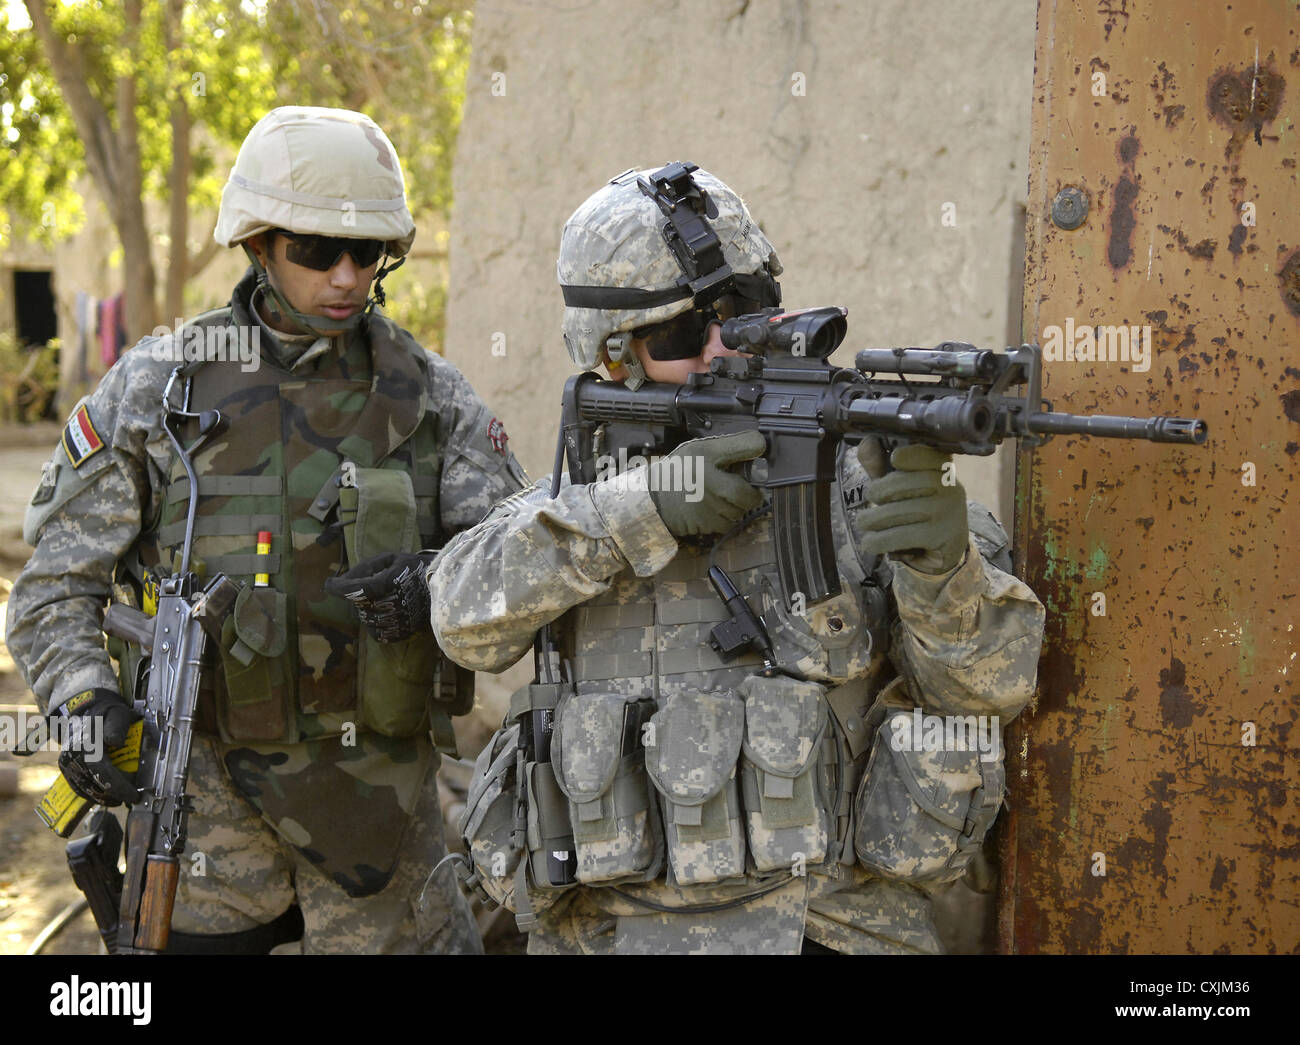 US Army soldiers return fire on insurgents during a combat operation February 11, 2007 in Buhriz, Iraq. Stock Photo